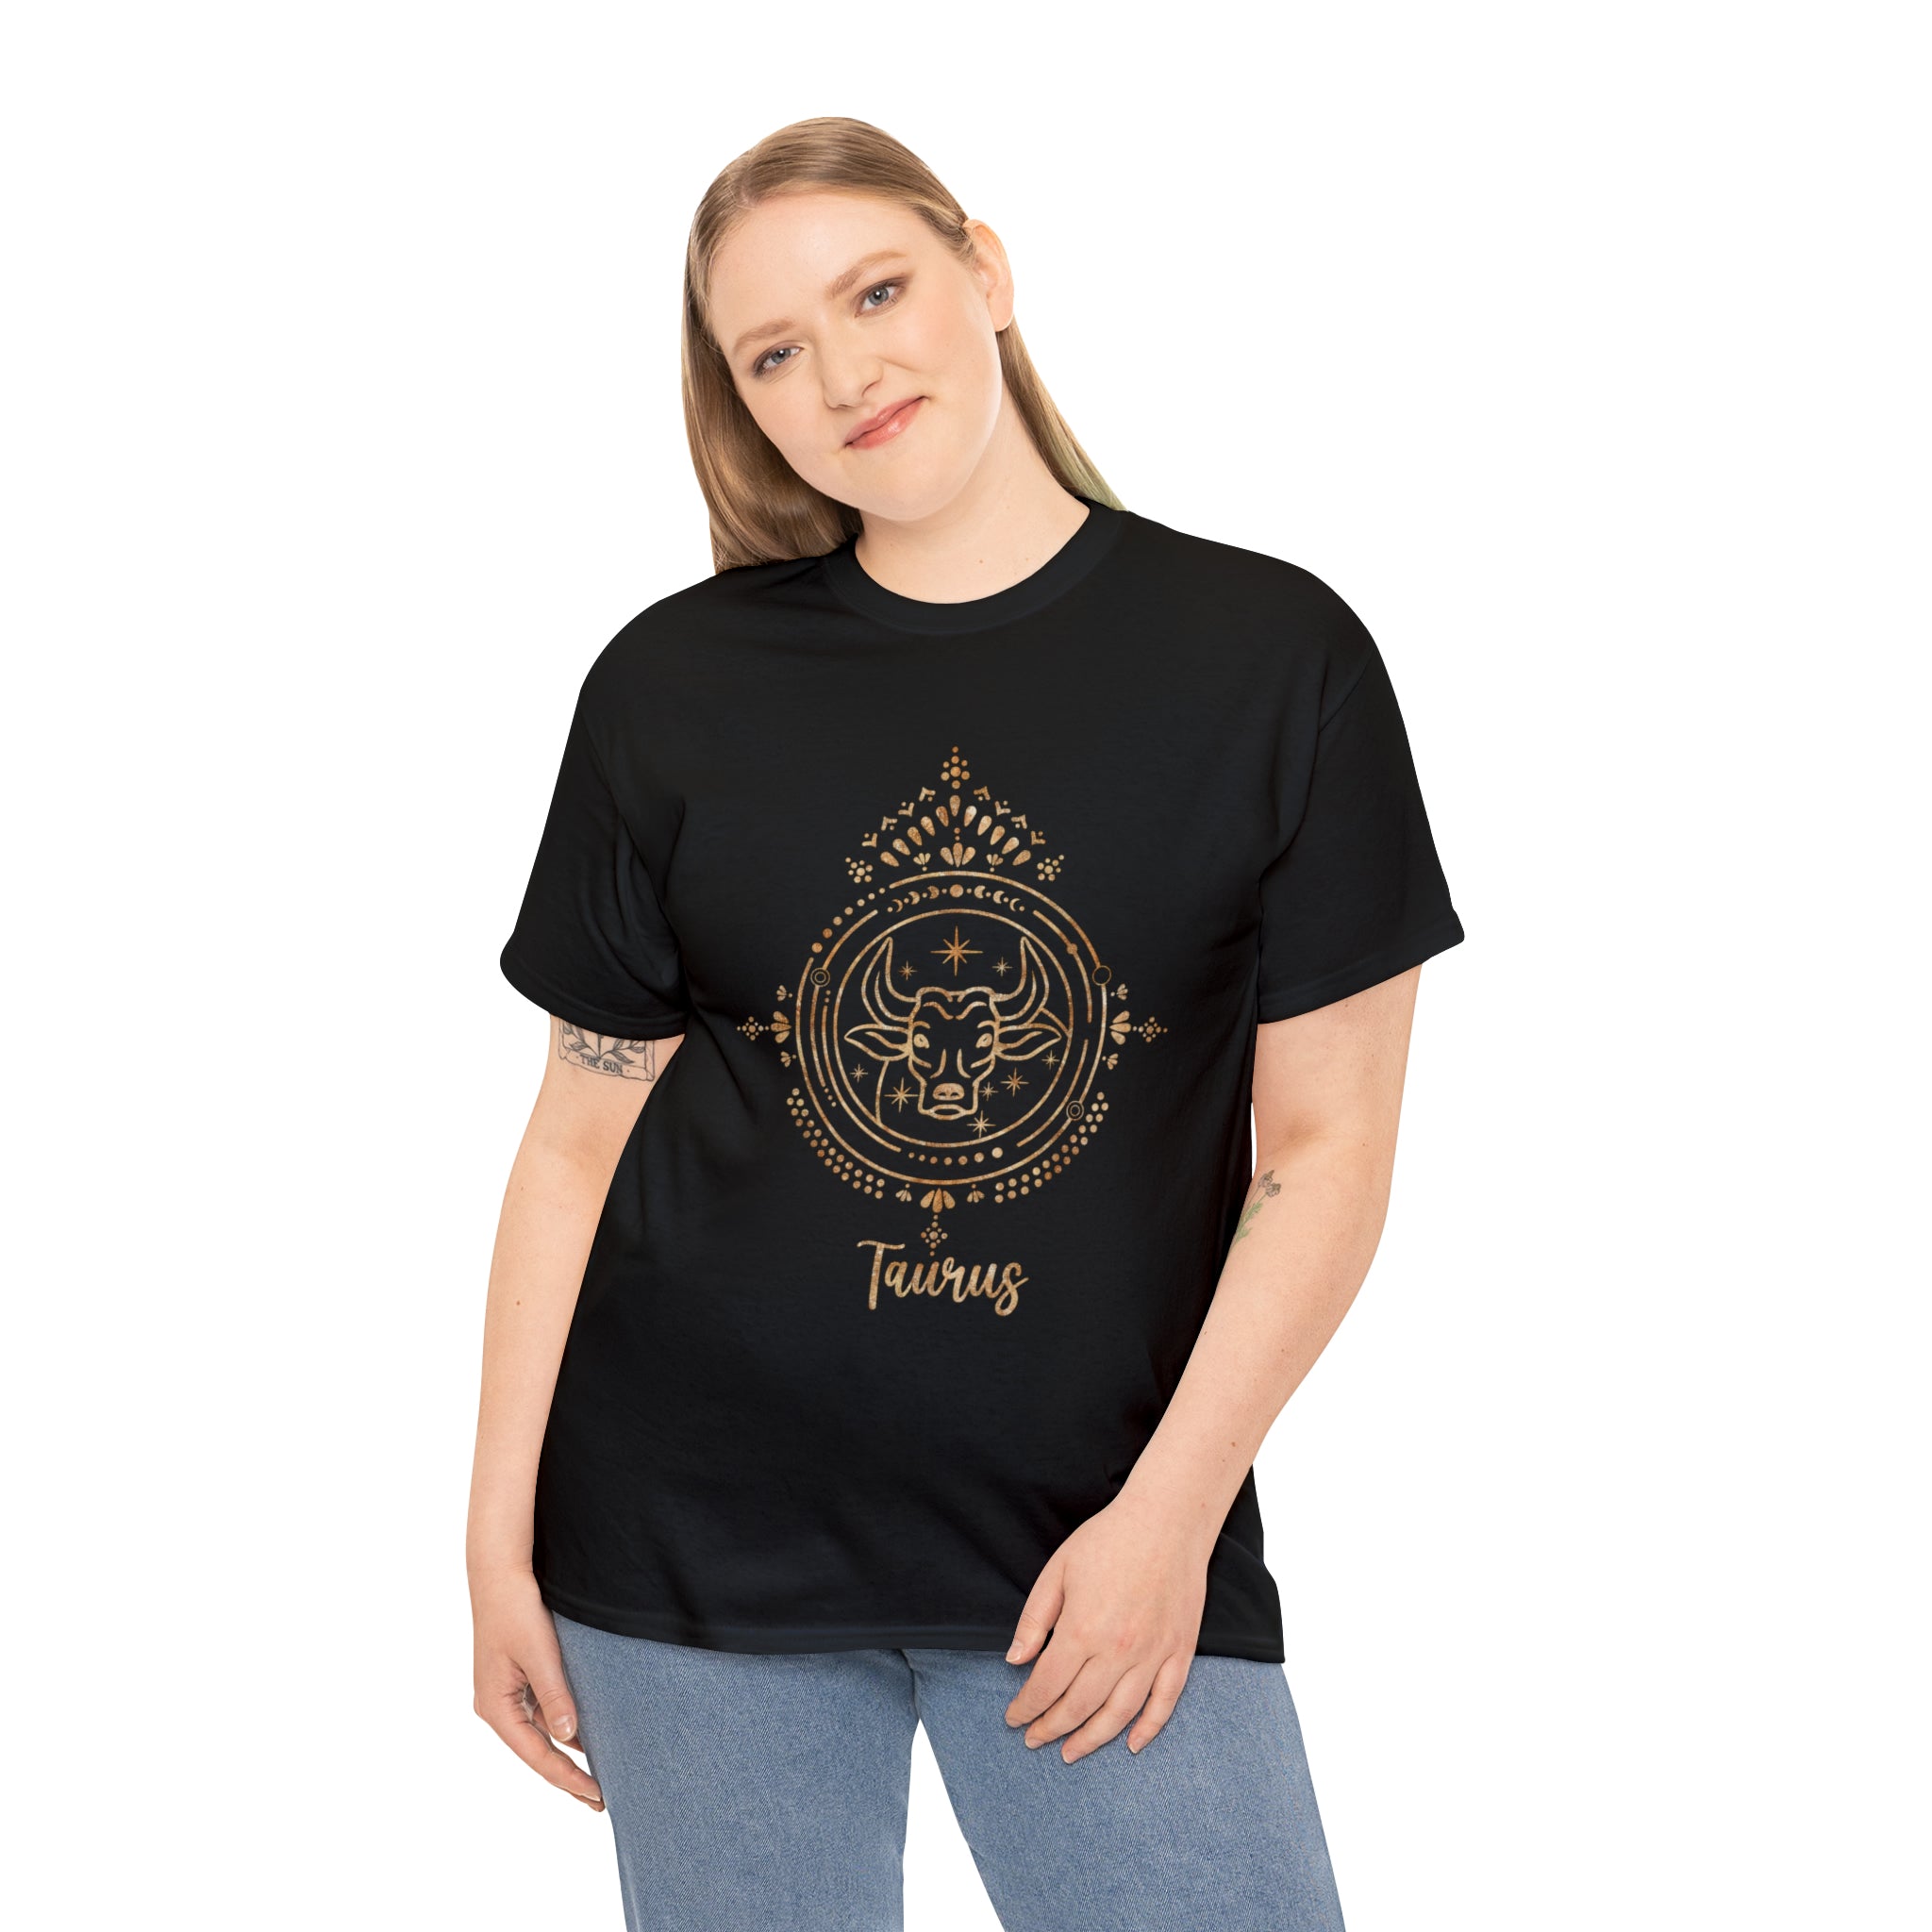 A steadfast woman wearing a black and gold Tauruses t-shirt, embodying the Taurus personality.